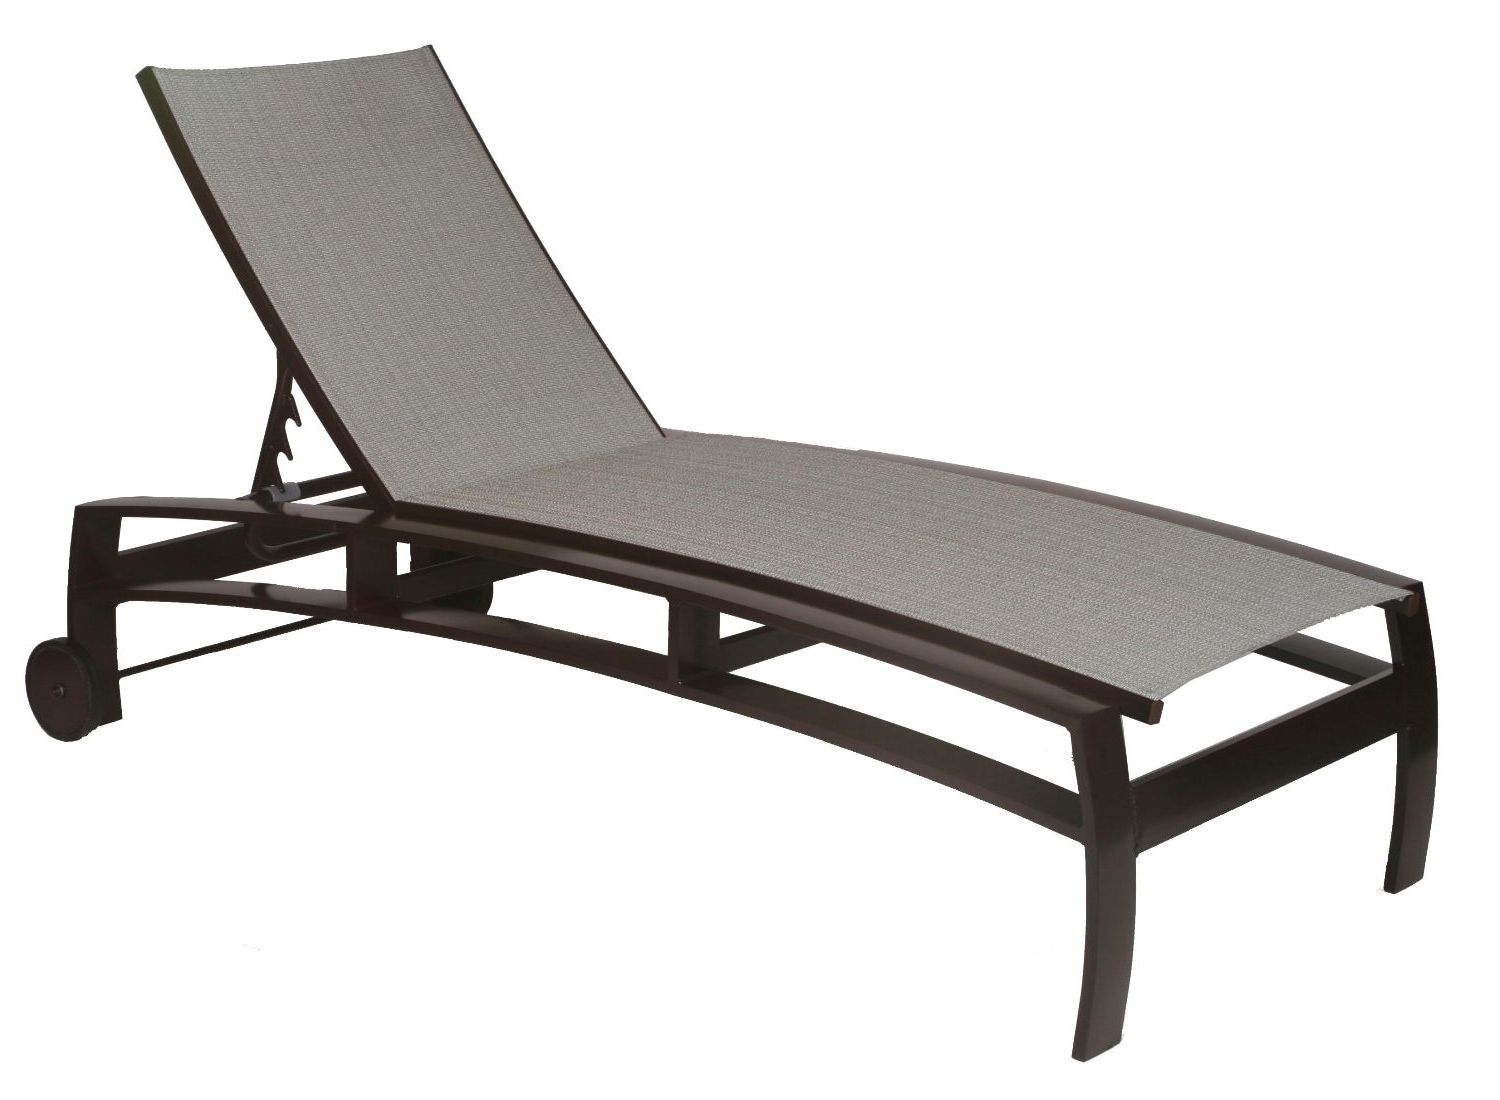 Most Recent Aluminum Sling Chaise Lounge Sam S Club Throughout Chair Plans 3 Pertaining To Sam's Club Chaise Lounge Chairs (View 15 of 15)